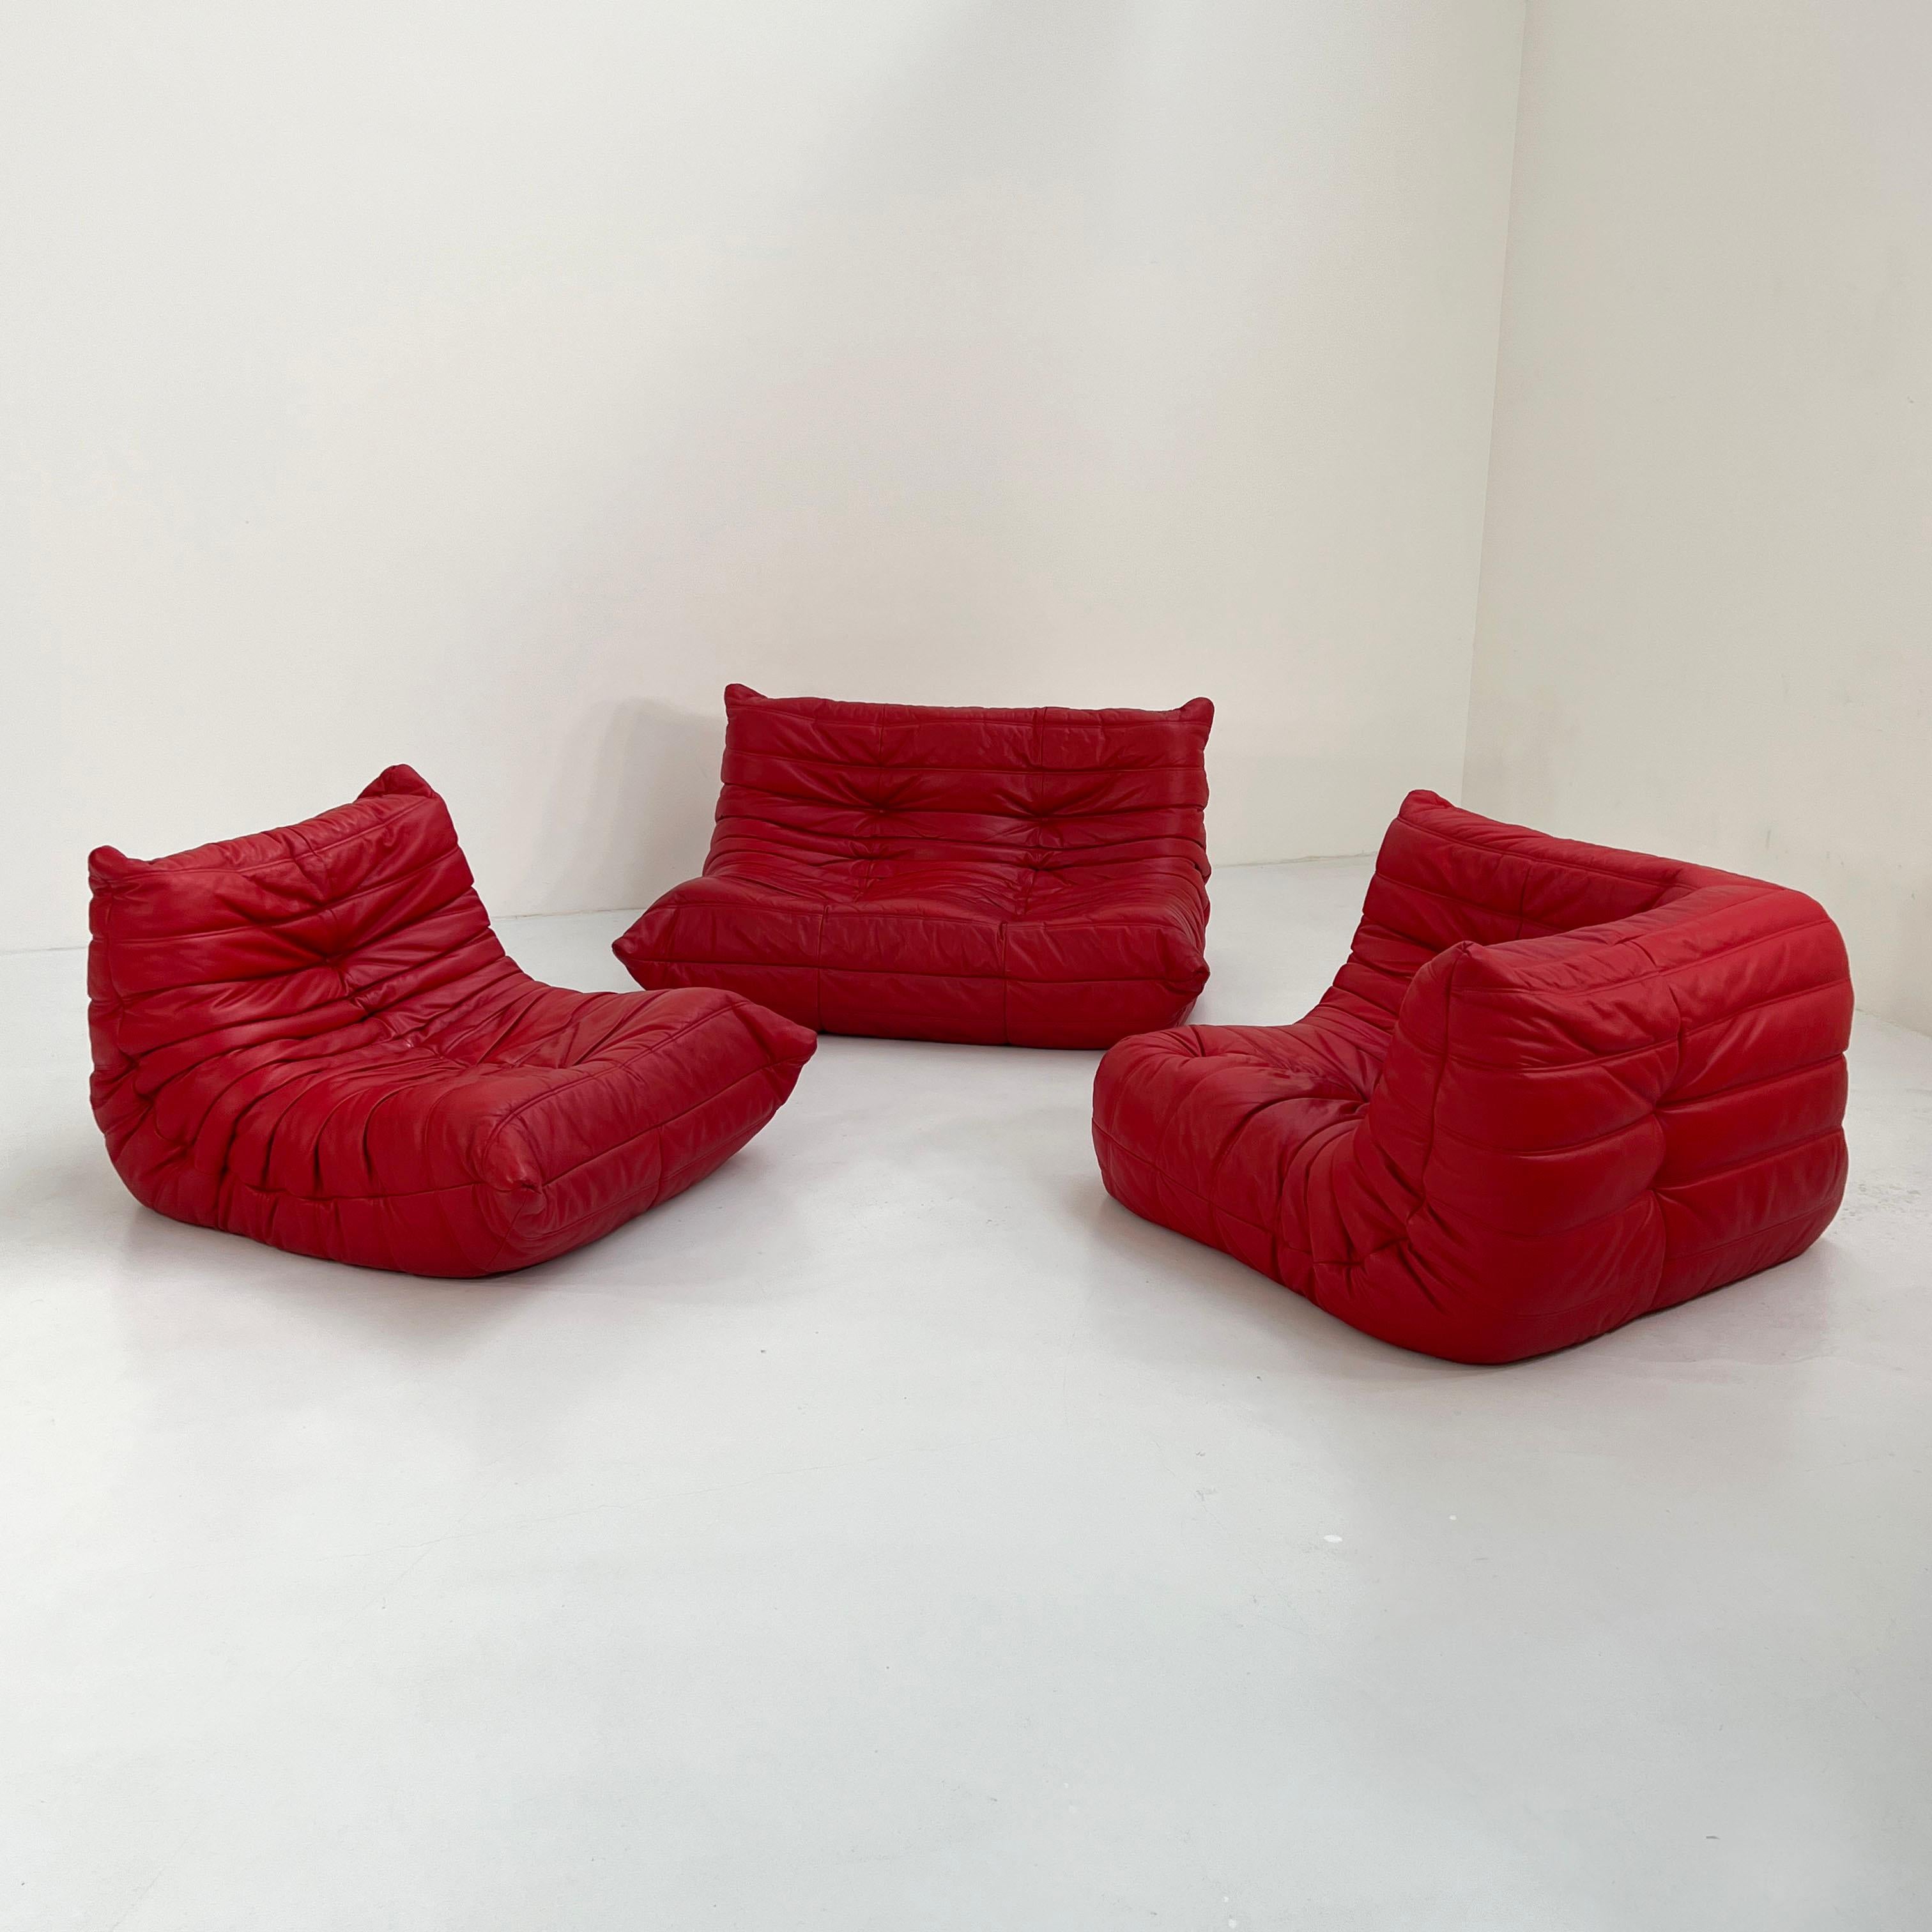 Italian Togo Sofa Set in Red Leather by Michel Ducaroy for Ligne Roset, 1970s For Sale